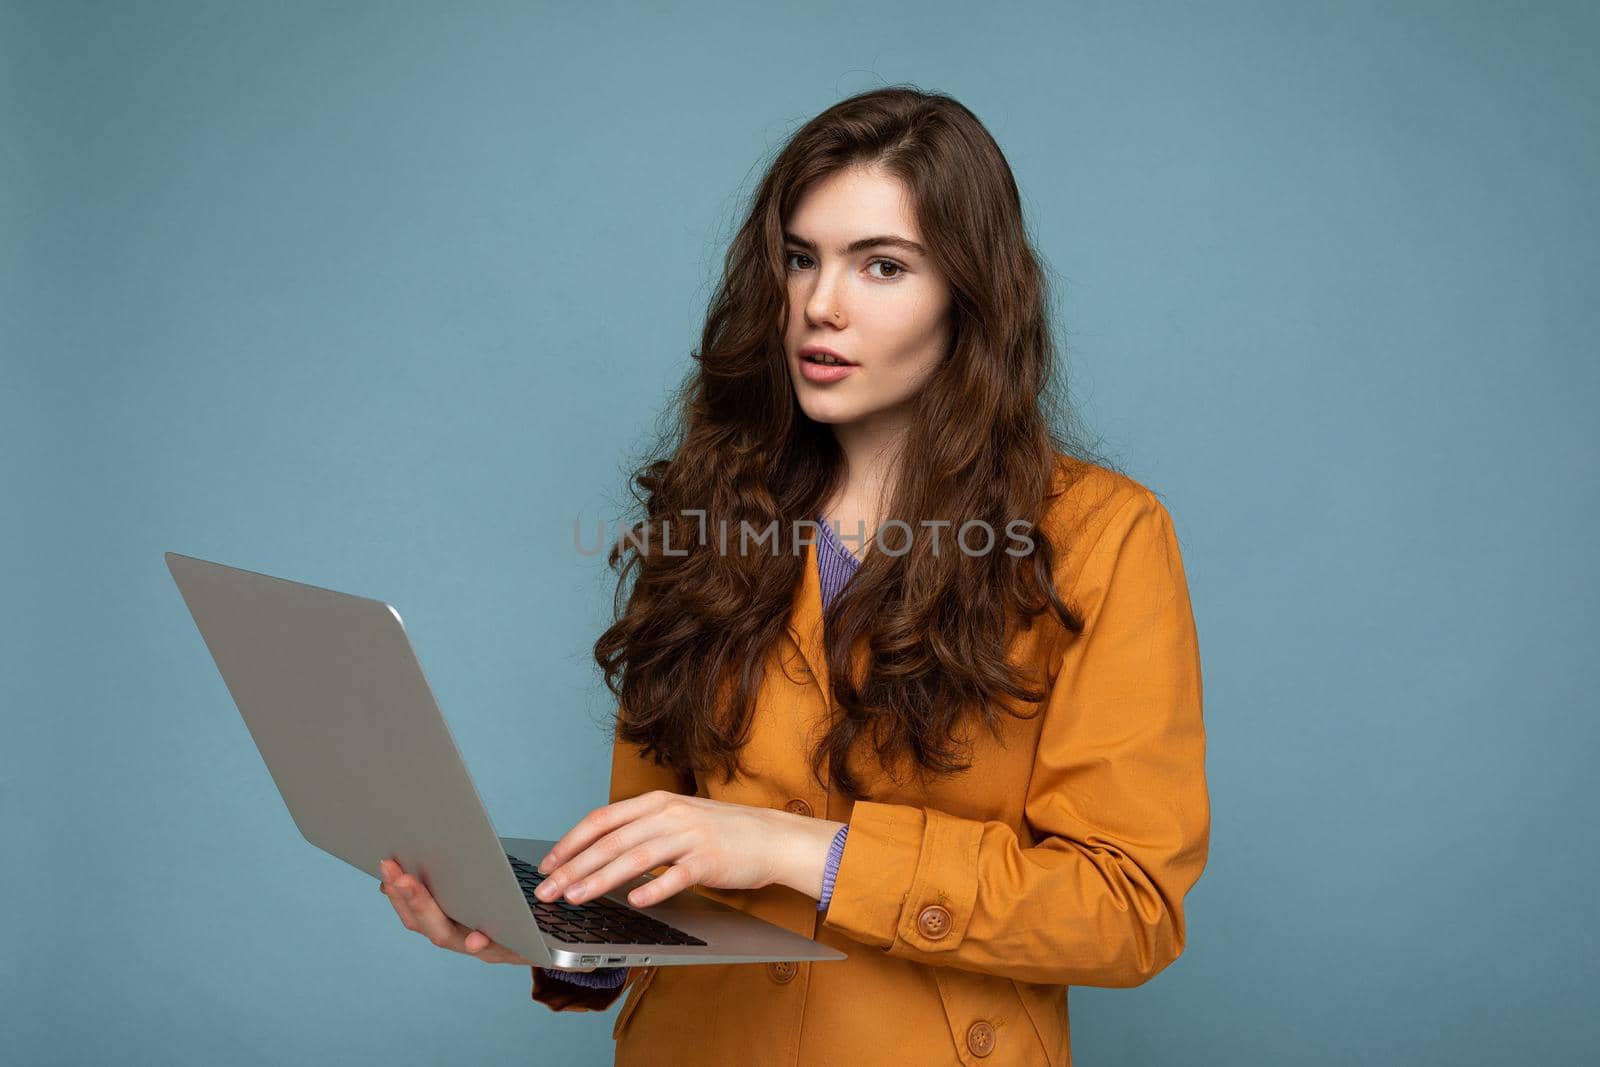 Close-up portrait of Beautiful calm brunet curly young woman holding netbook computer looking at camera wearing yellow jacket typing on keyboard isolated on blue background by TRMK